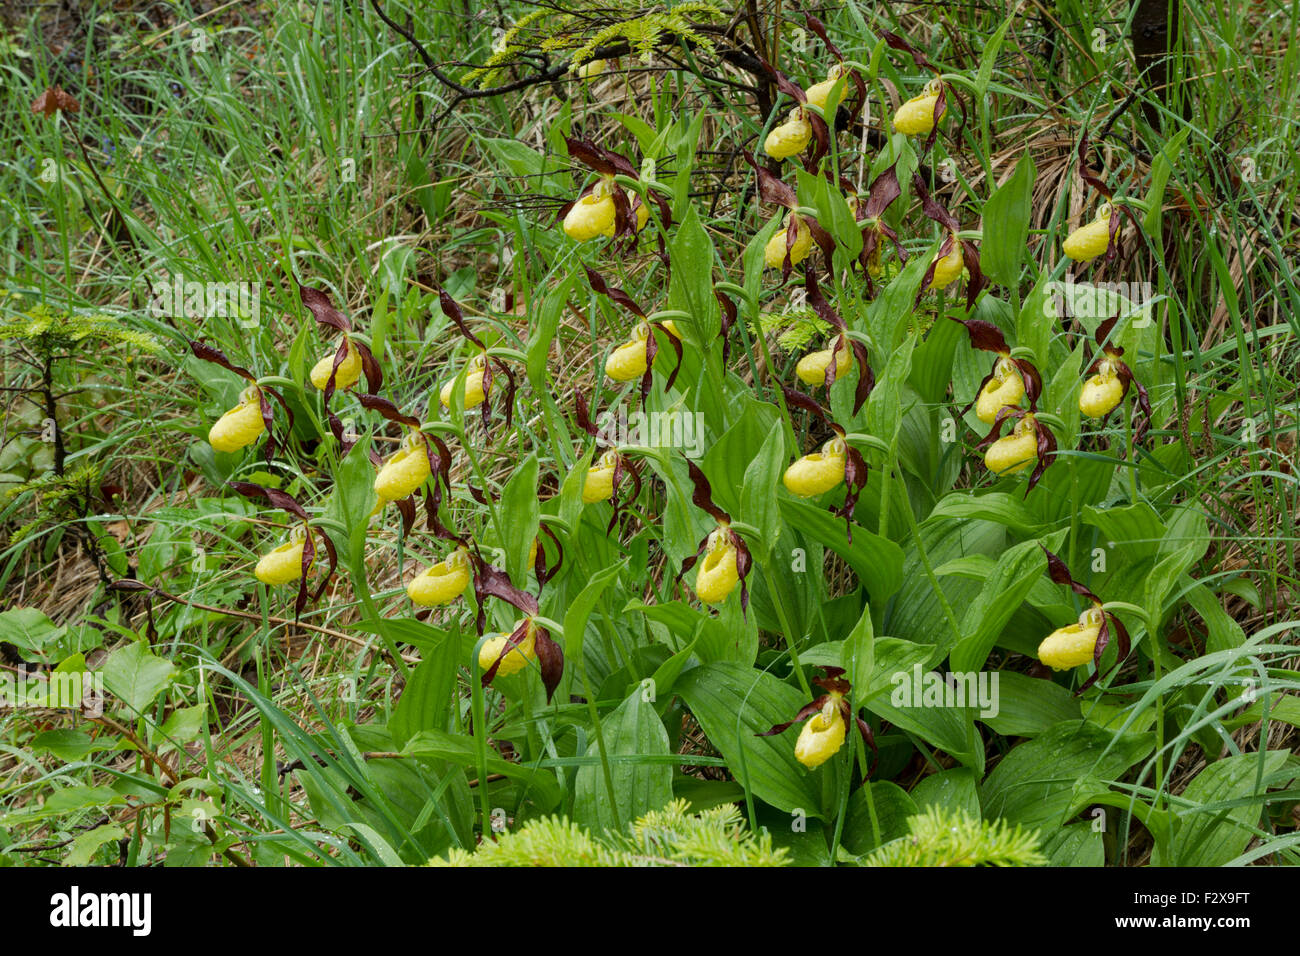 Lady's slipper orchid, Latin name Cypripedium calceolus, yellow, growing in a large group covered in raindrops Stock Photo